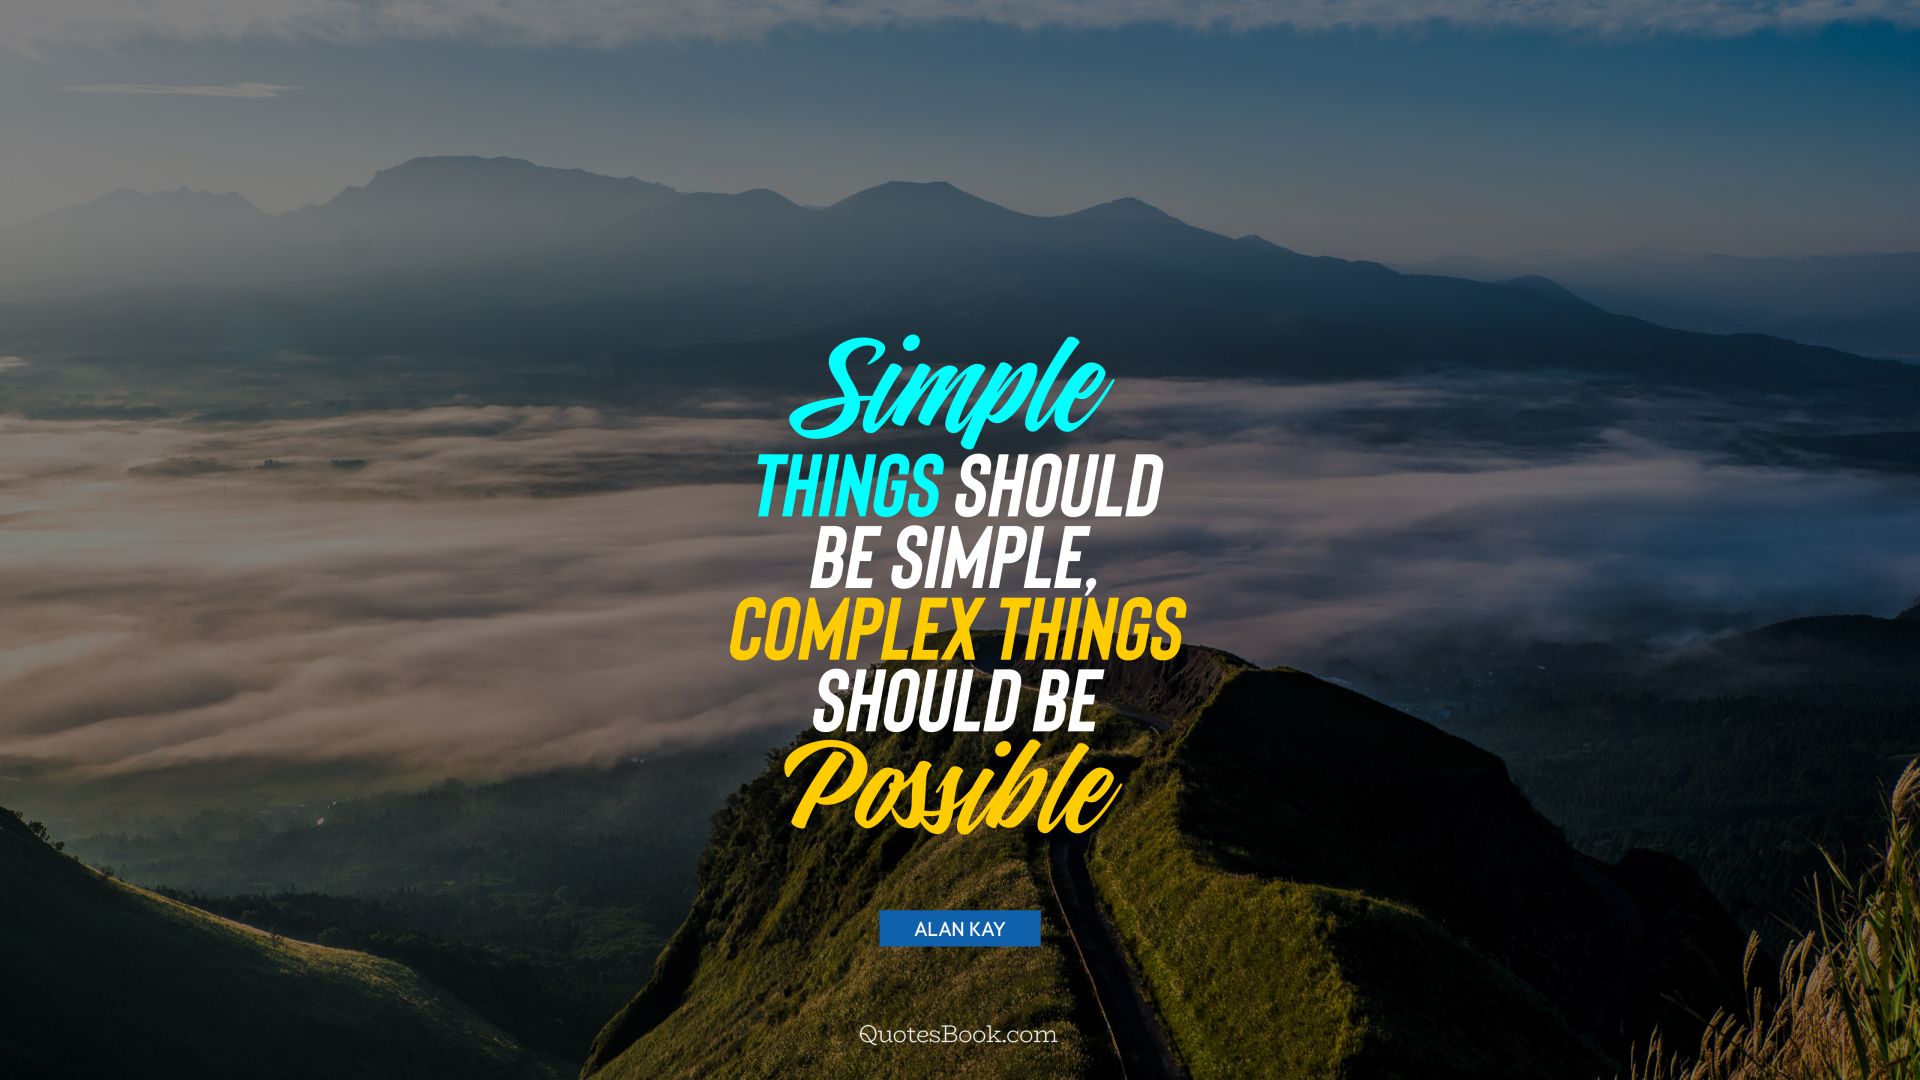 Simple things should be simple, complex things should be possible. - Quote by Alan Kay